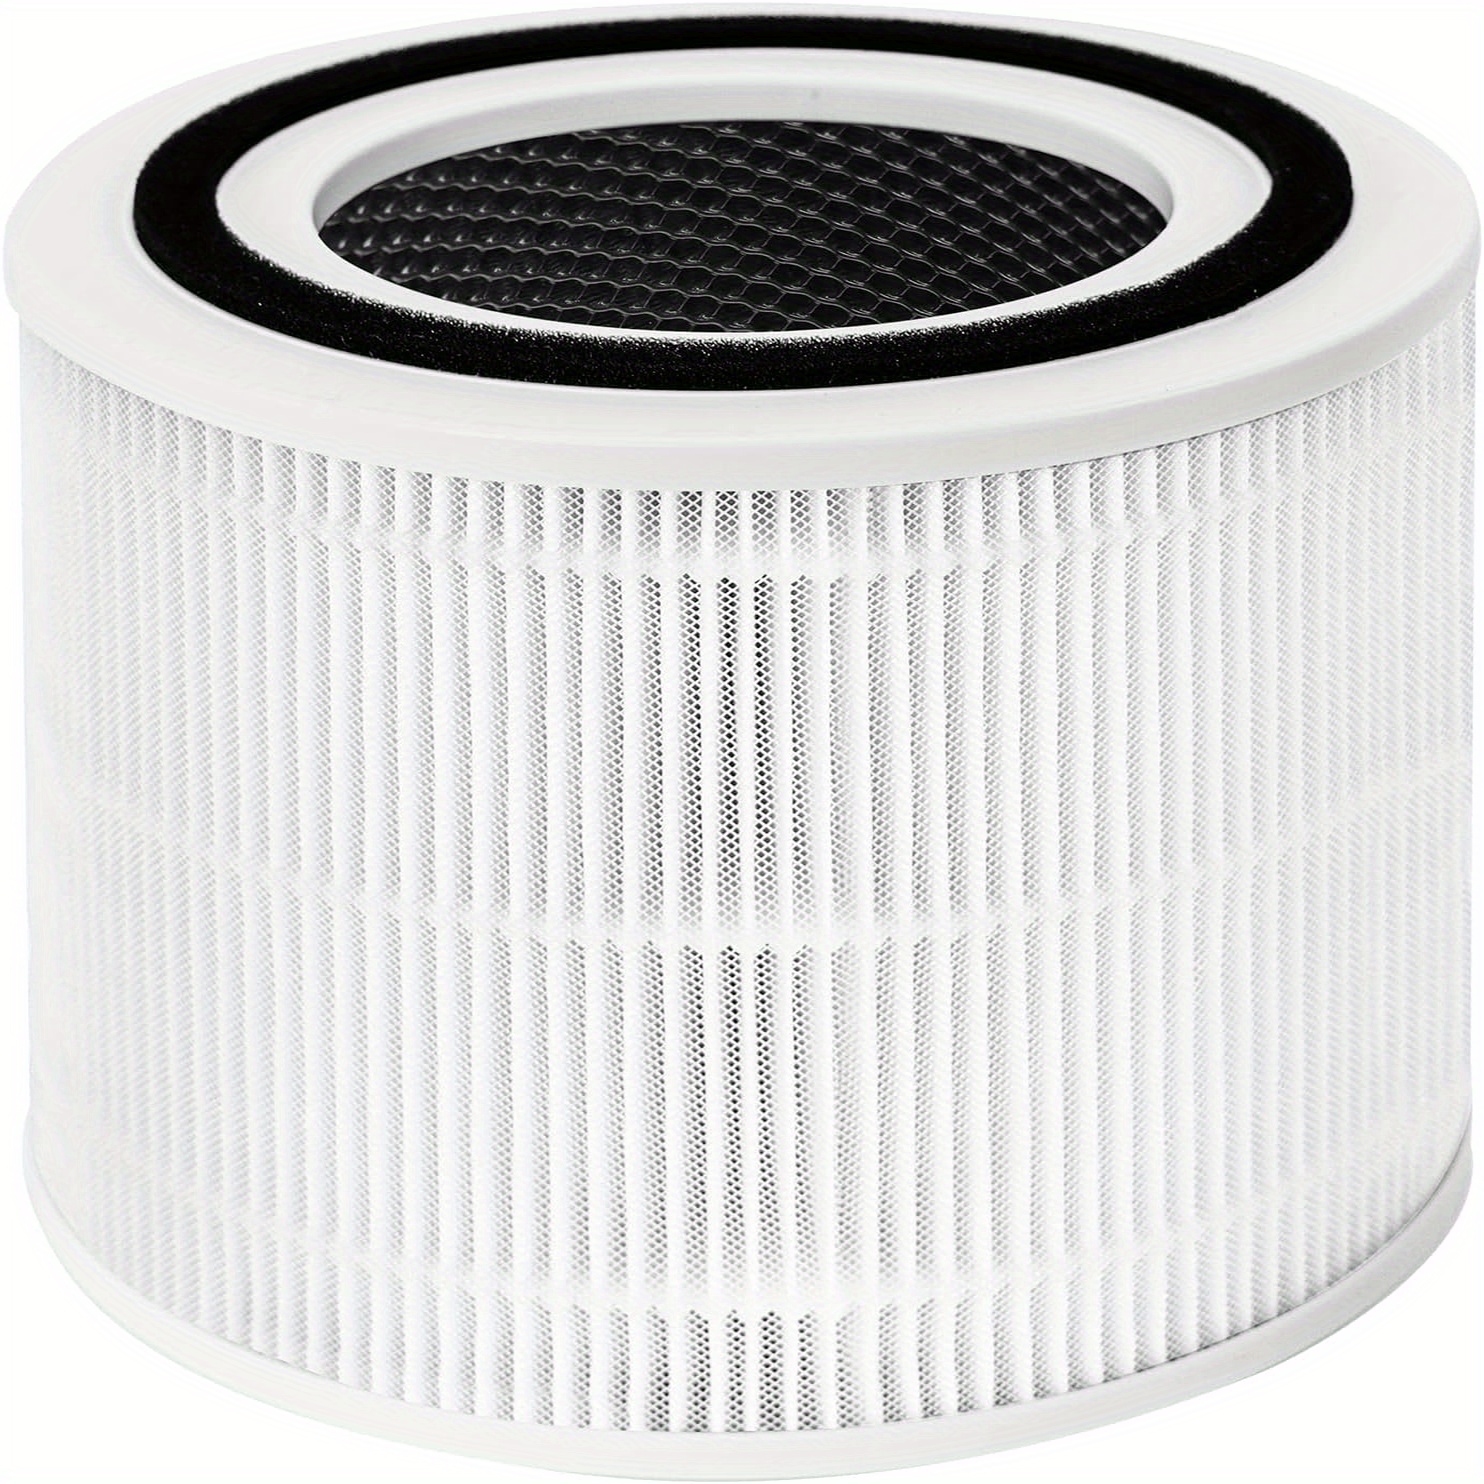  LEVOIT LV-H128 Air Purifier Replacement, 3-in-1 Pre